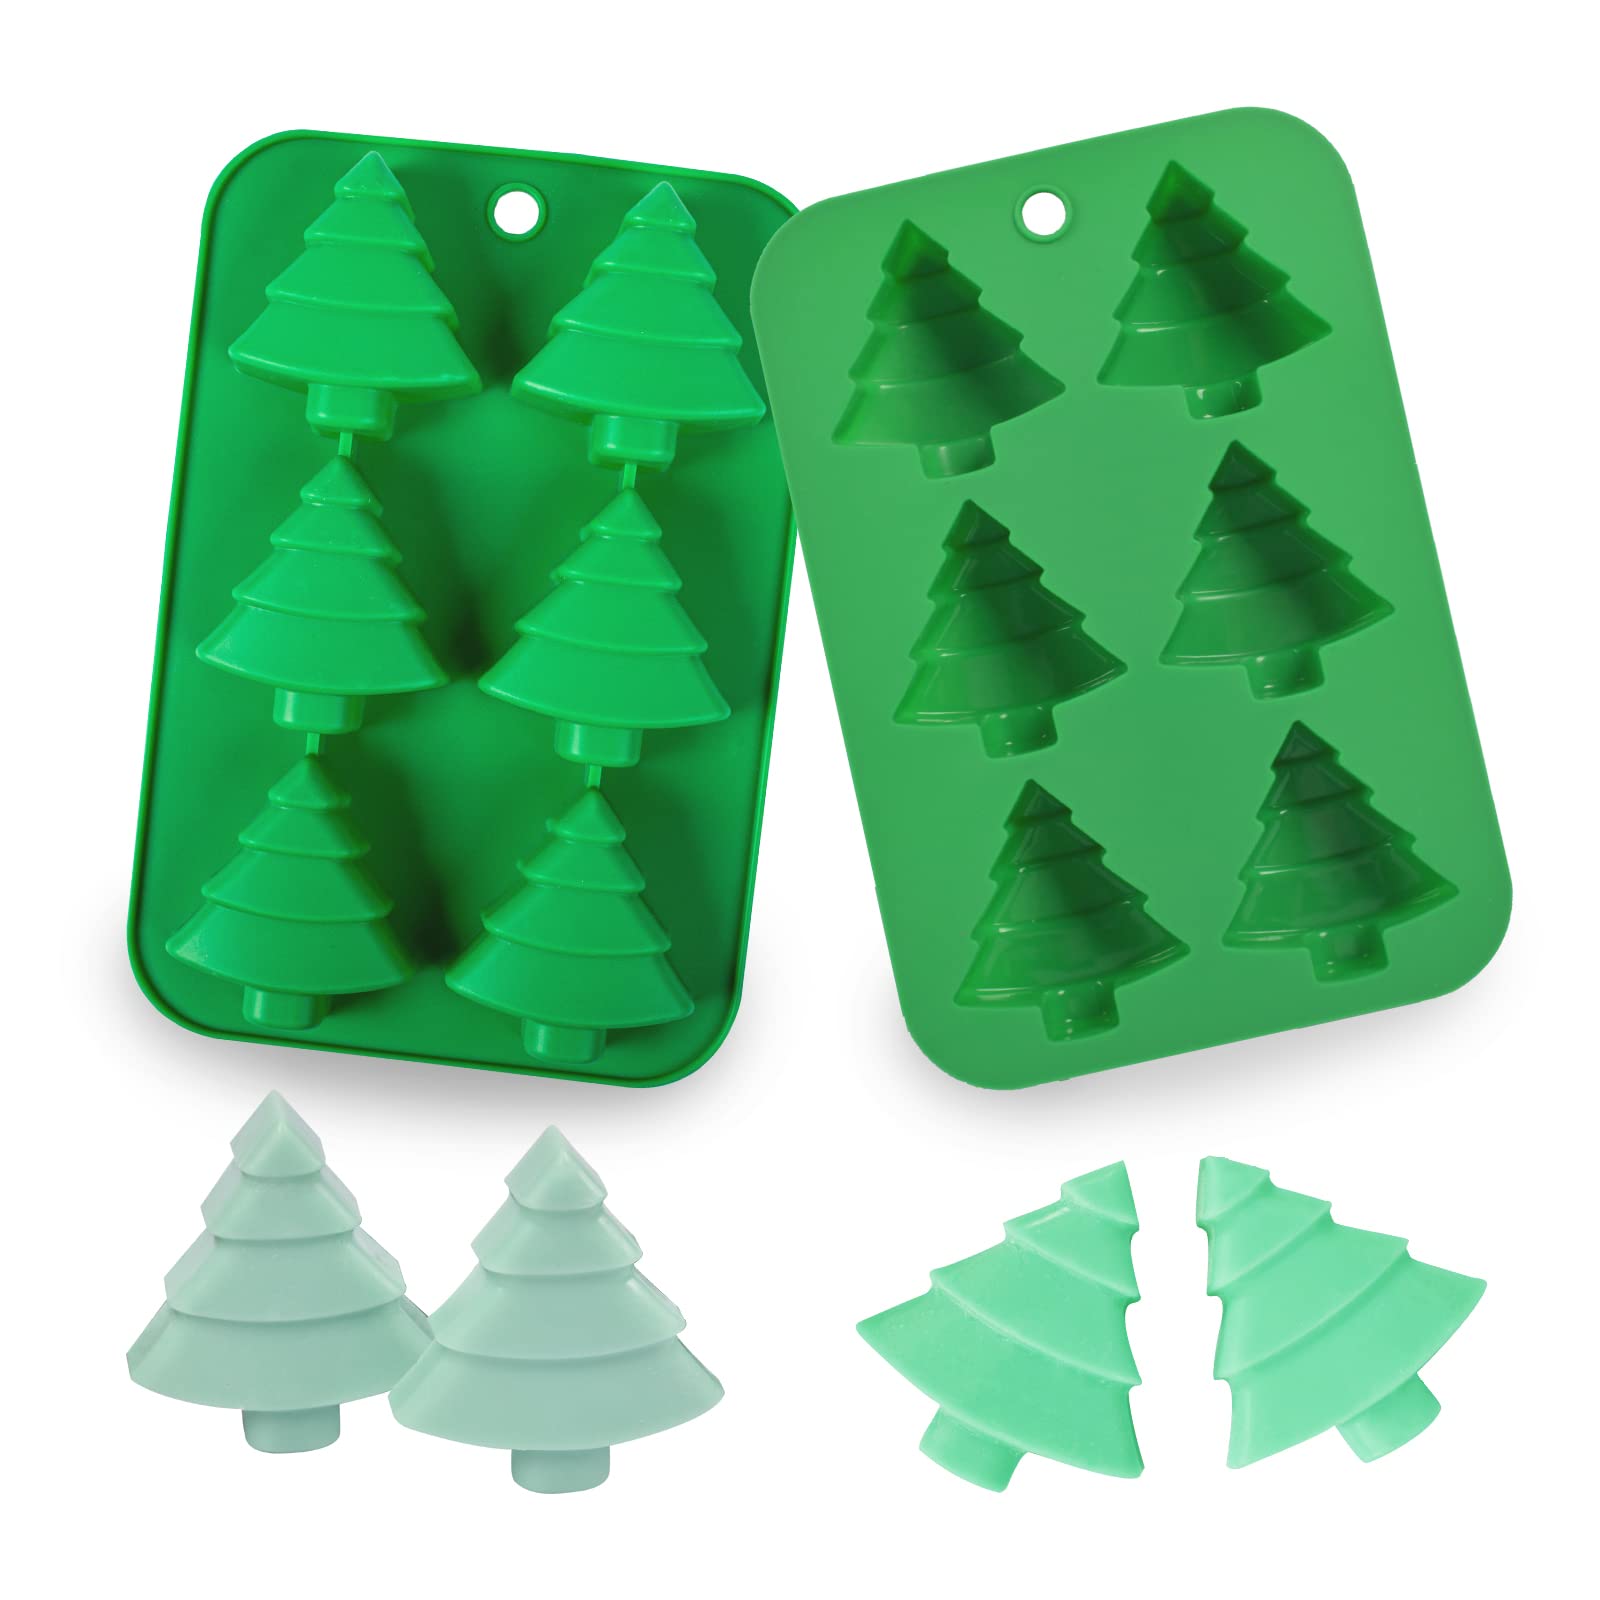 2 Pcs 6 Cavity Christmas Tree Silicone Baking Mold, Flexible Non-Stick Cake Silicone Mold Chocolate Candy Handmade Soap Ice Cube Biscuit Christmas Silicone Baking Moulds Trays Pan (A)